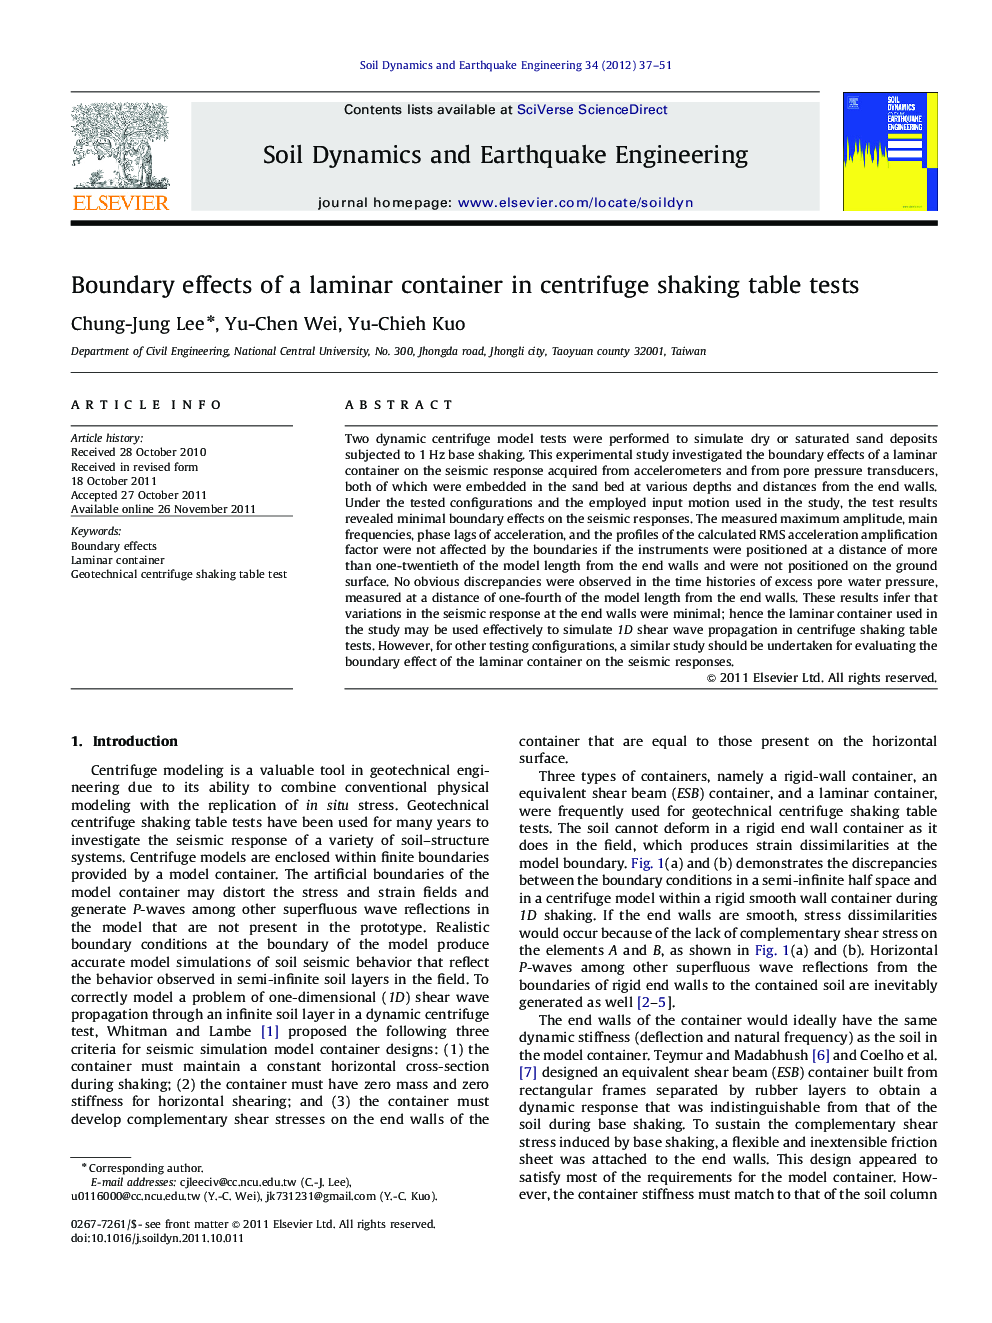 Boundary effects of a laminar container in centrifuge shaking table tests